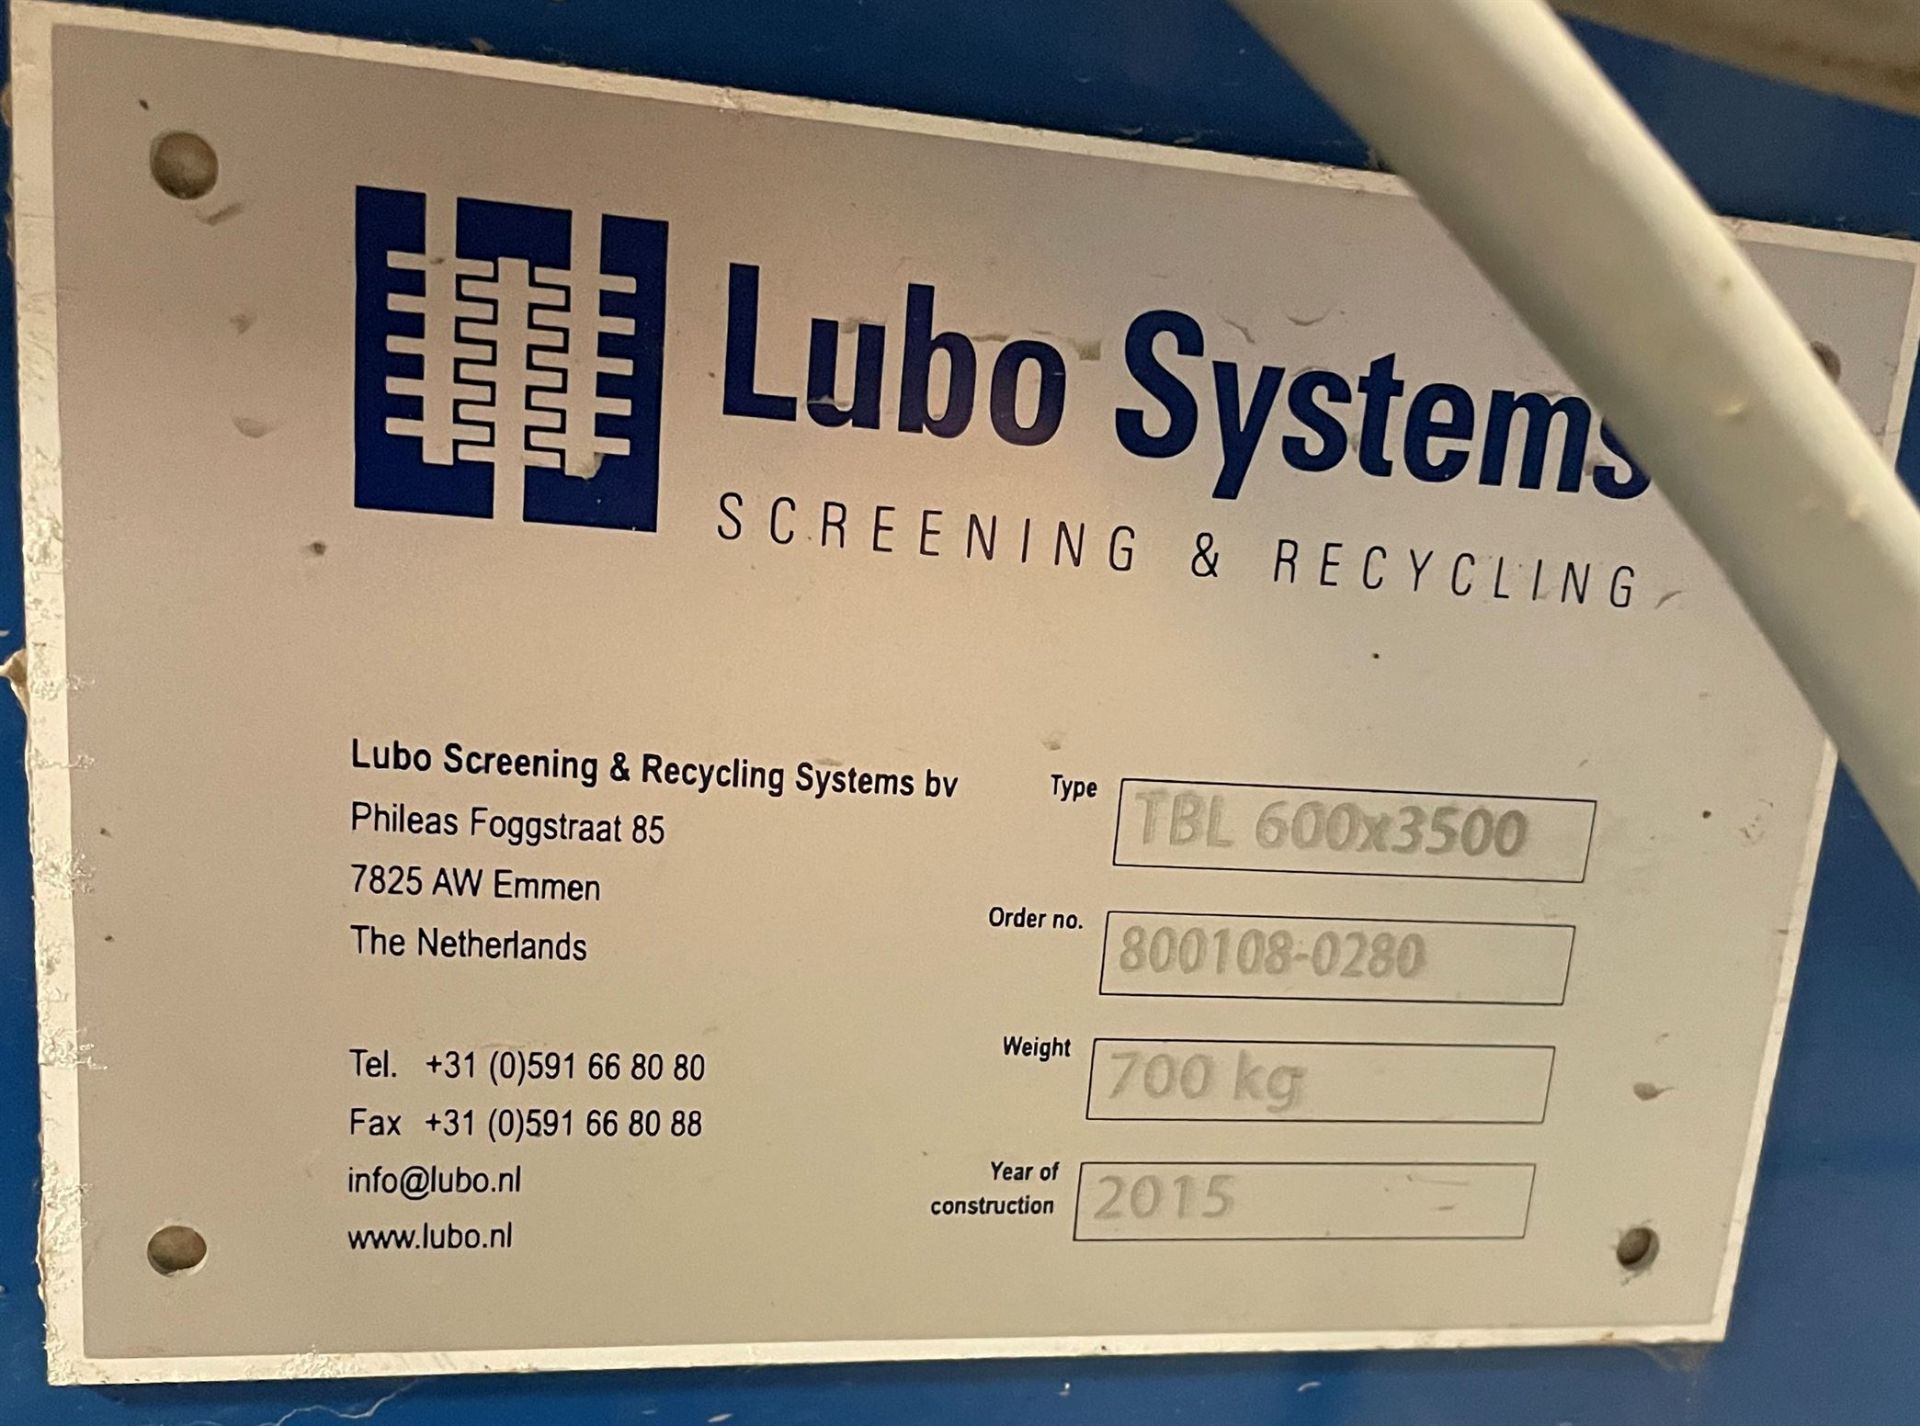 2015 LUBO SYSTEMS TBL 600x3500 Inclined Belt Conveyor, s/n 800108-0280, 600mm x 3500mm, SEW 3.7 kW - Image 5 of 5